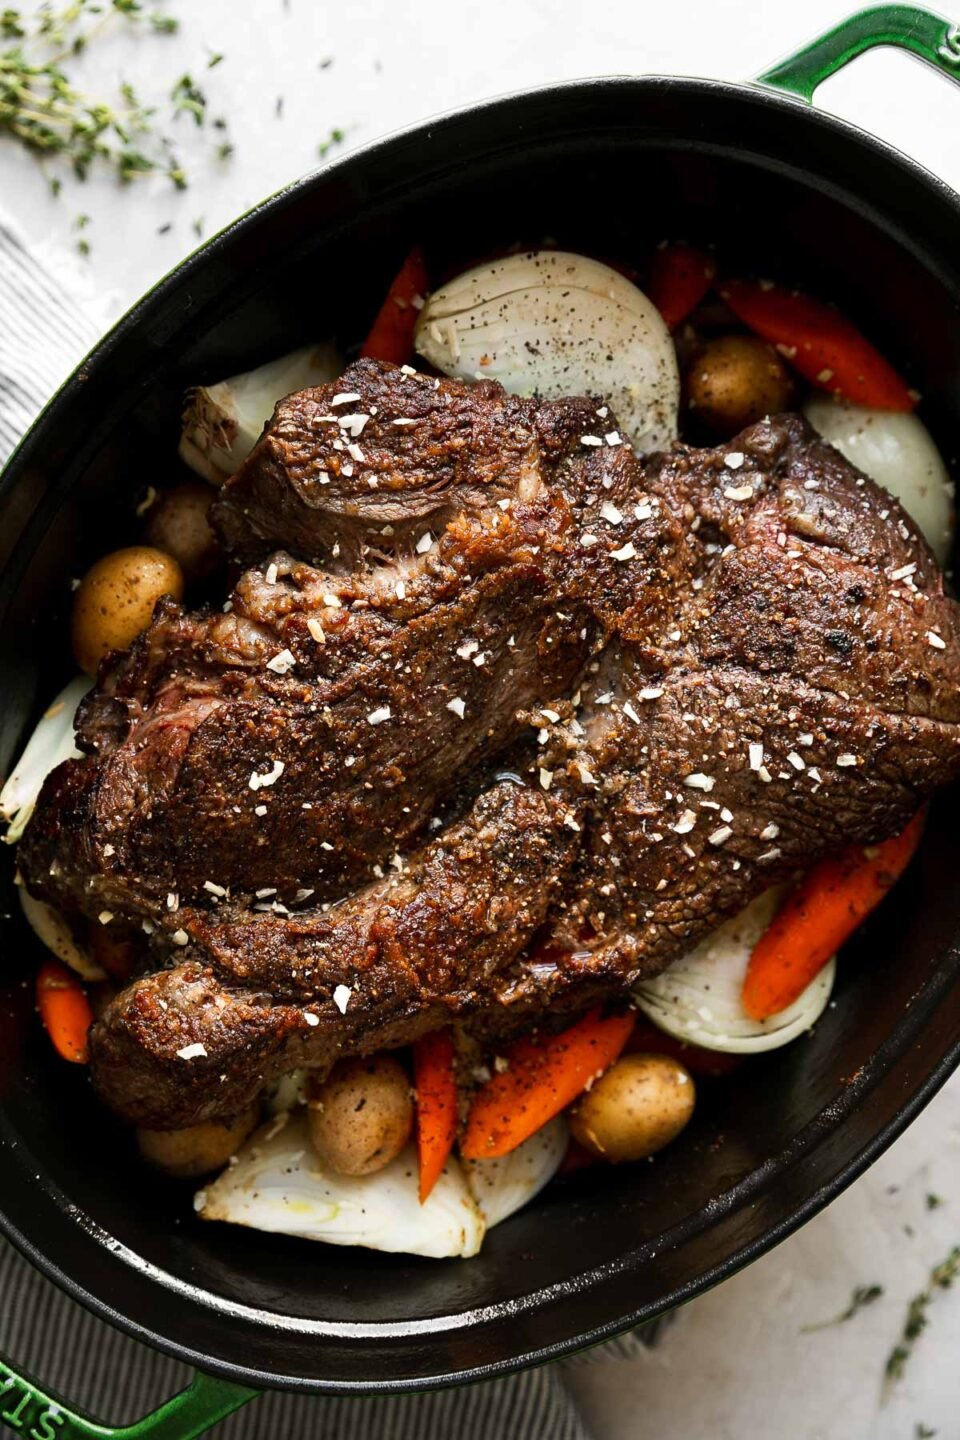 How to make pot roast with vegetables, step 3: Assemble the braised pot roast. An oval green Staub cast iron dutch oven is filled with a browned chuck roast. Halved or roughly chopped baby potatoes, carrots, and yellow onion have been added to the dutch oven surrounding the roast and beef stock, Worcestershire sauce, and dry onion soup mix have also been added over top. The dutch oven sits atop a creamy white textured surface with fresh sprigs of thyme and a blue and white striped linen napkin surrounding the dutch oven.